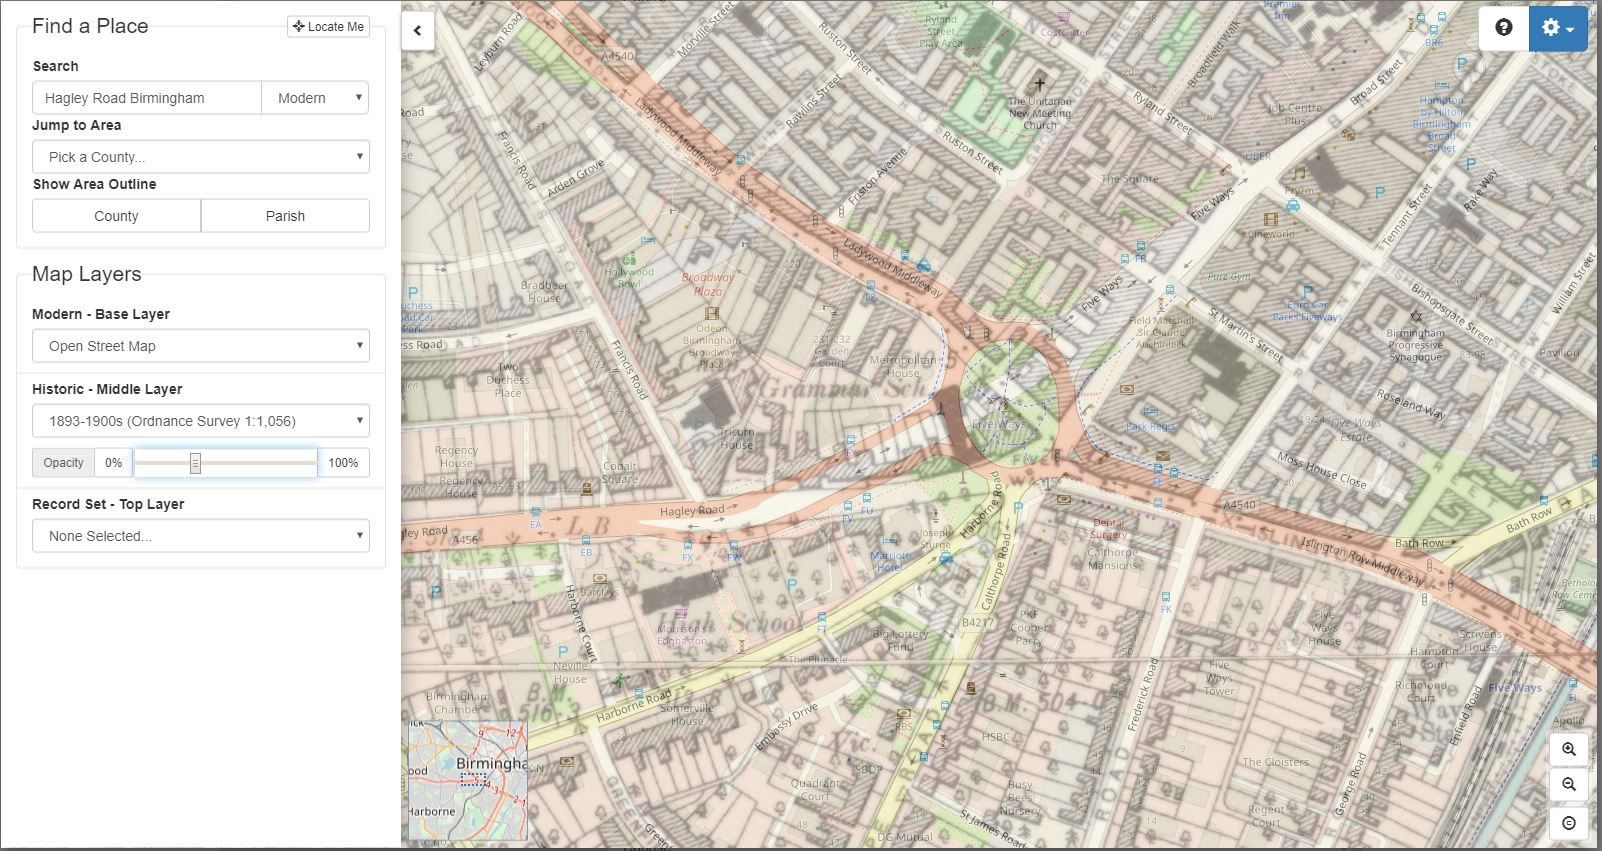 A modern street map faded in under the historic map layer reveals the footprint of the school beneath the new roundabout junction